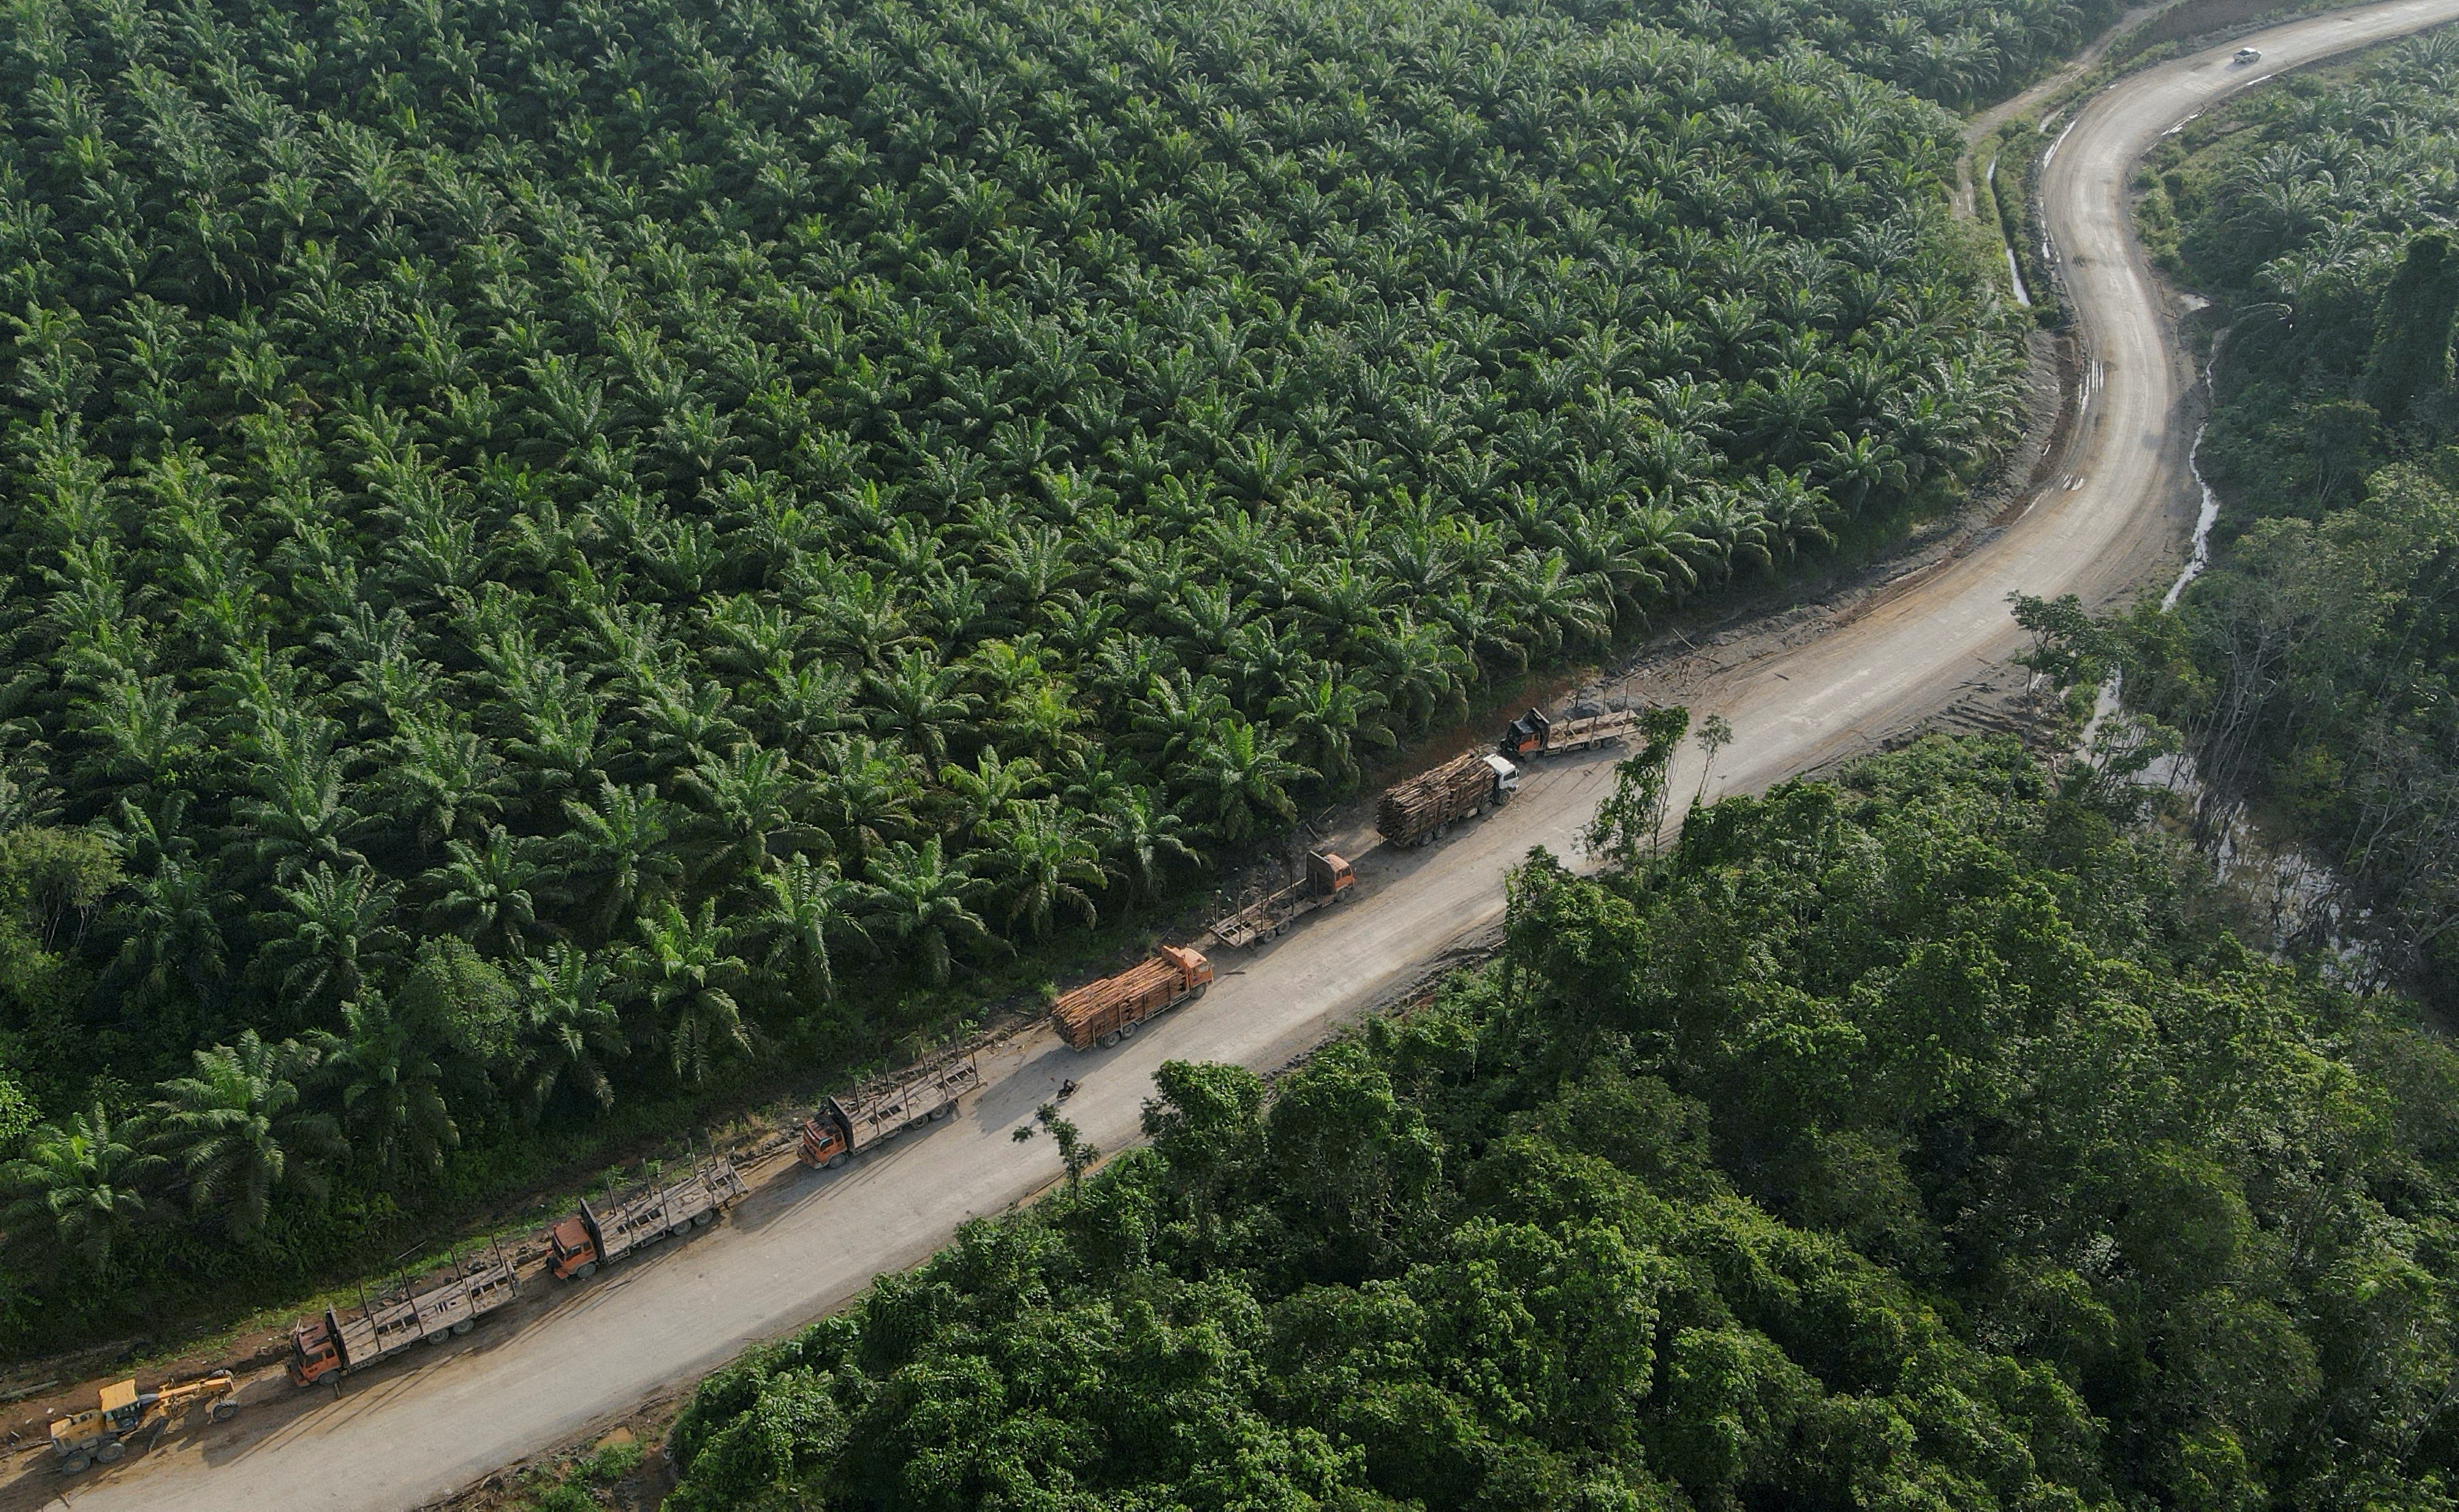 As ageing trees sap yields, Asian palm oil firms race to replant